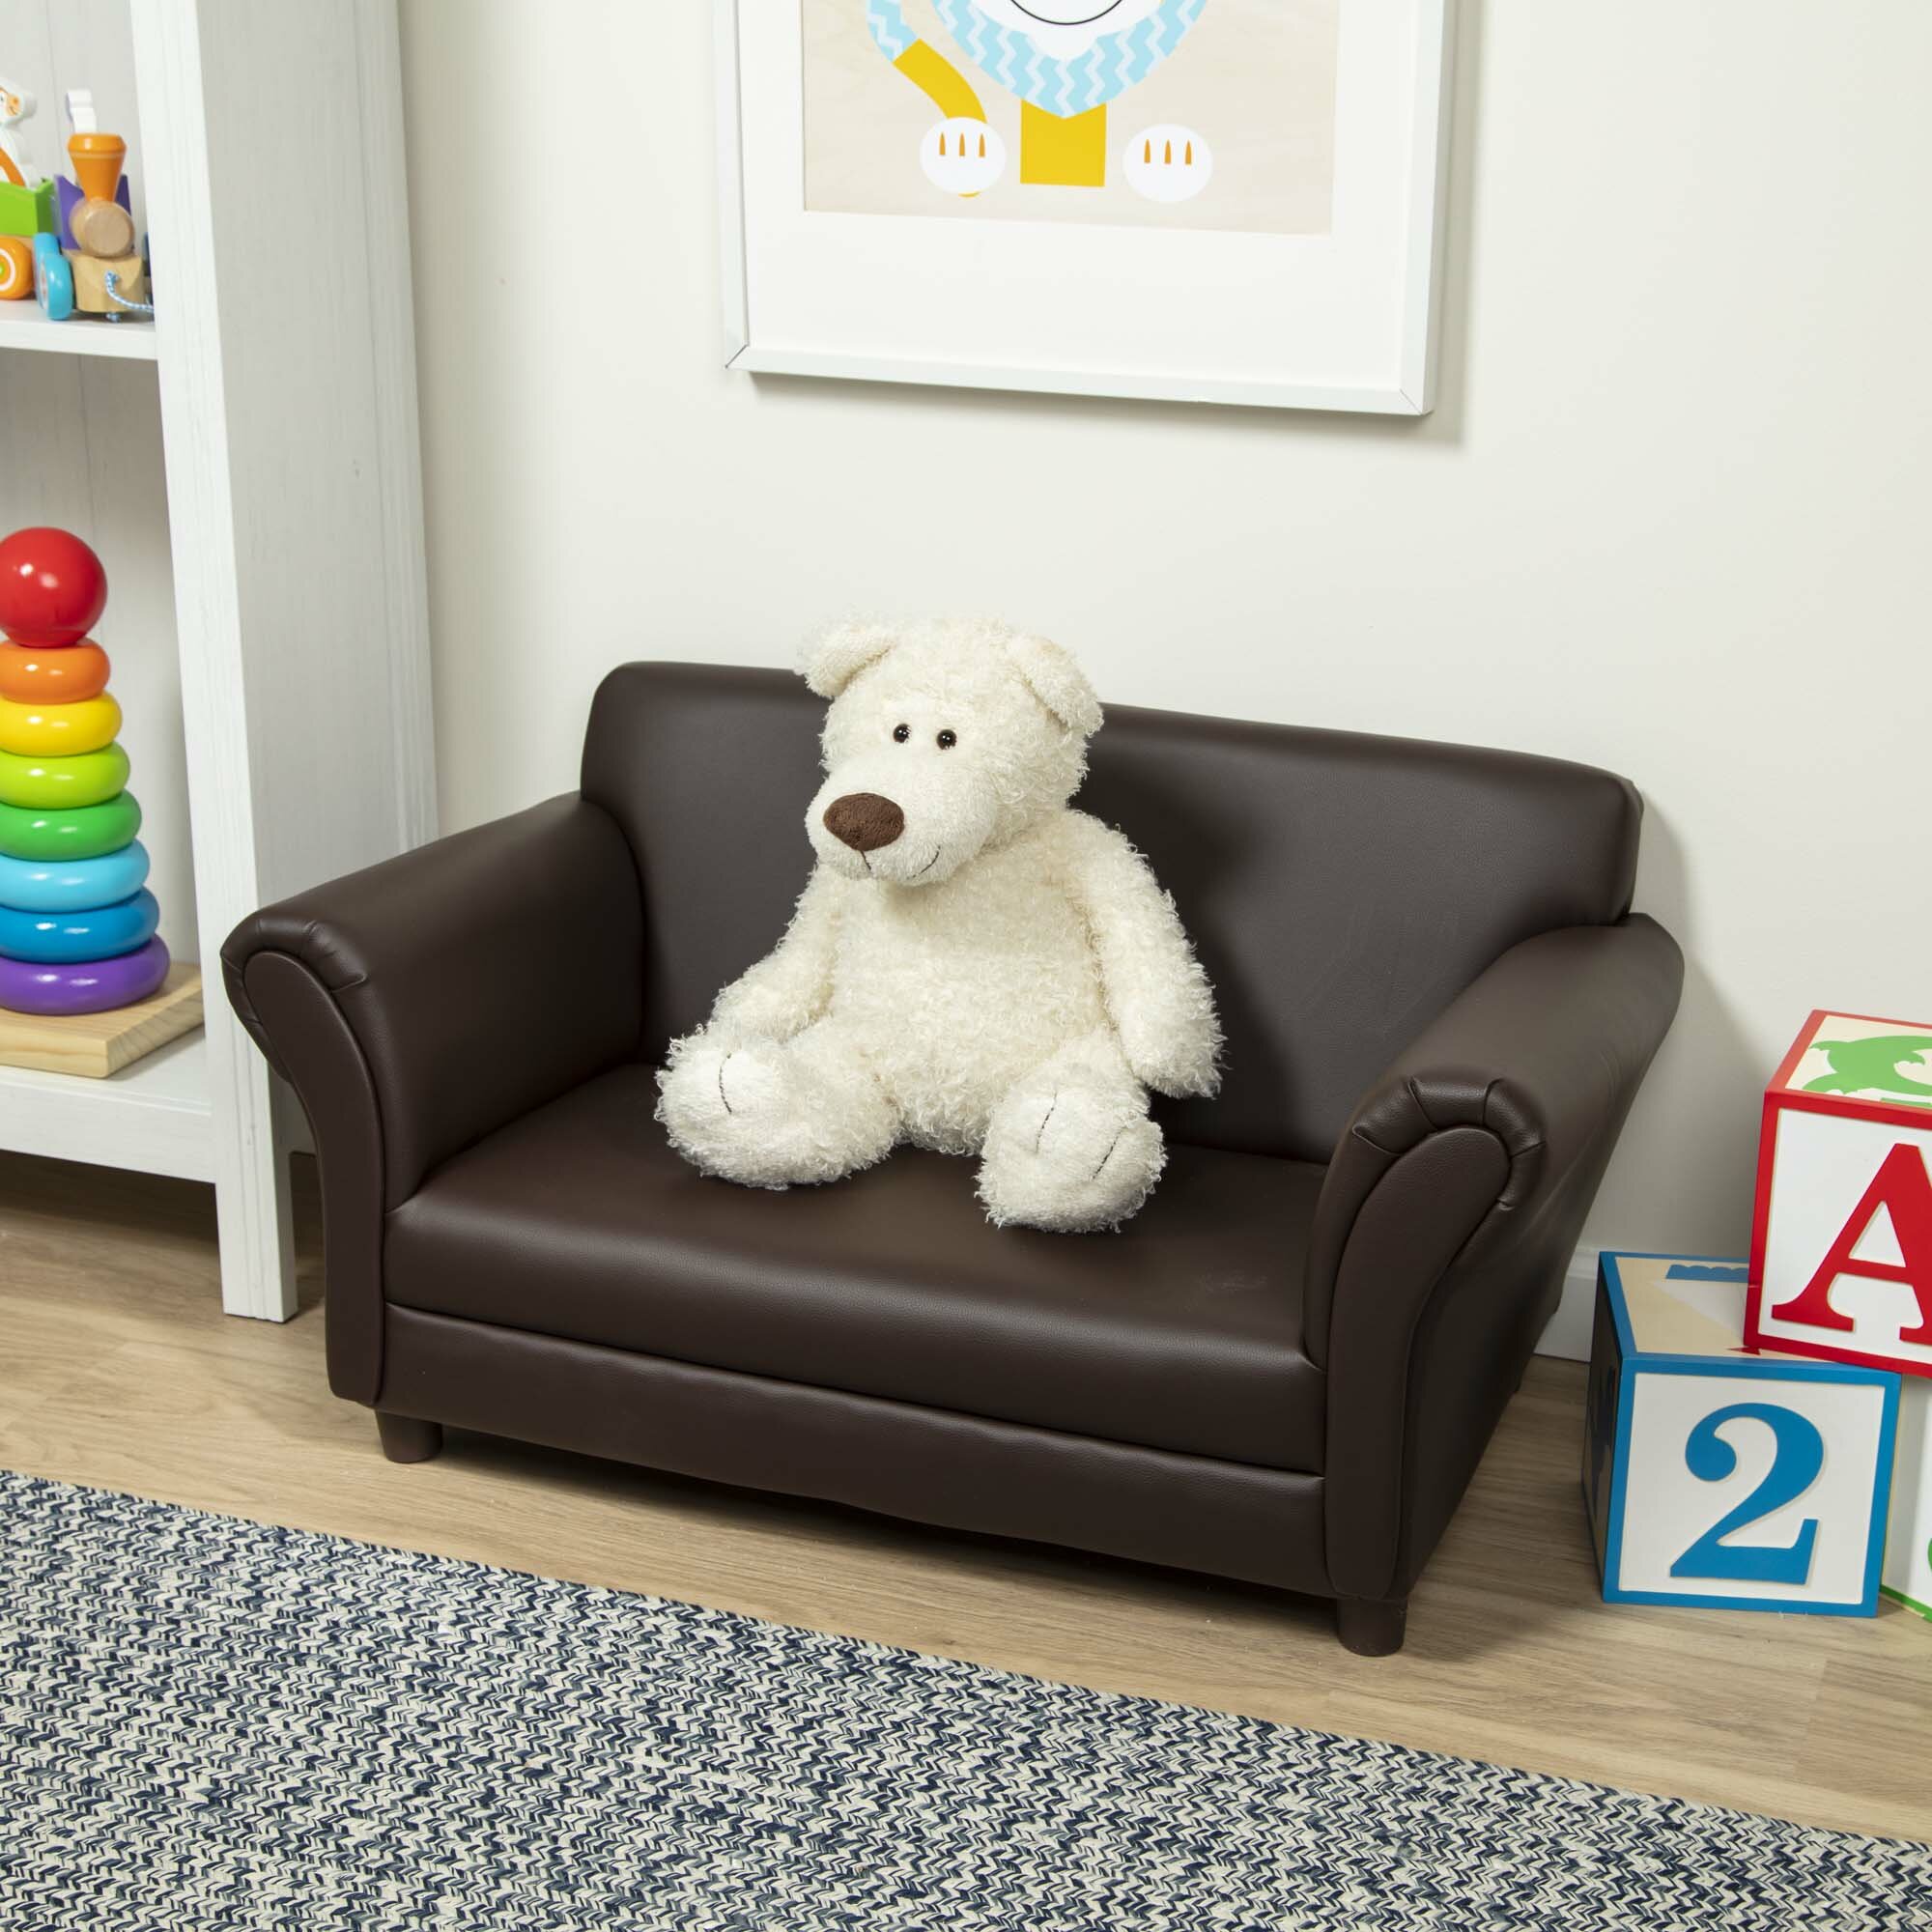 leather sofa for kids